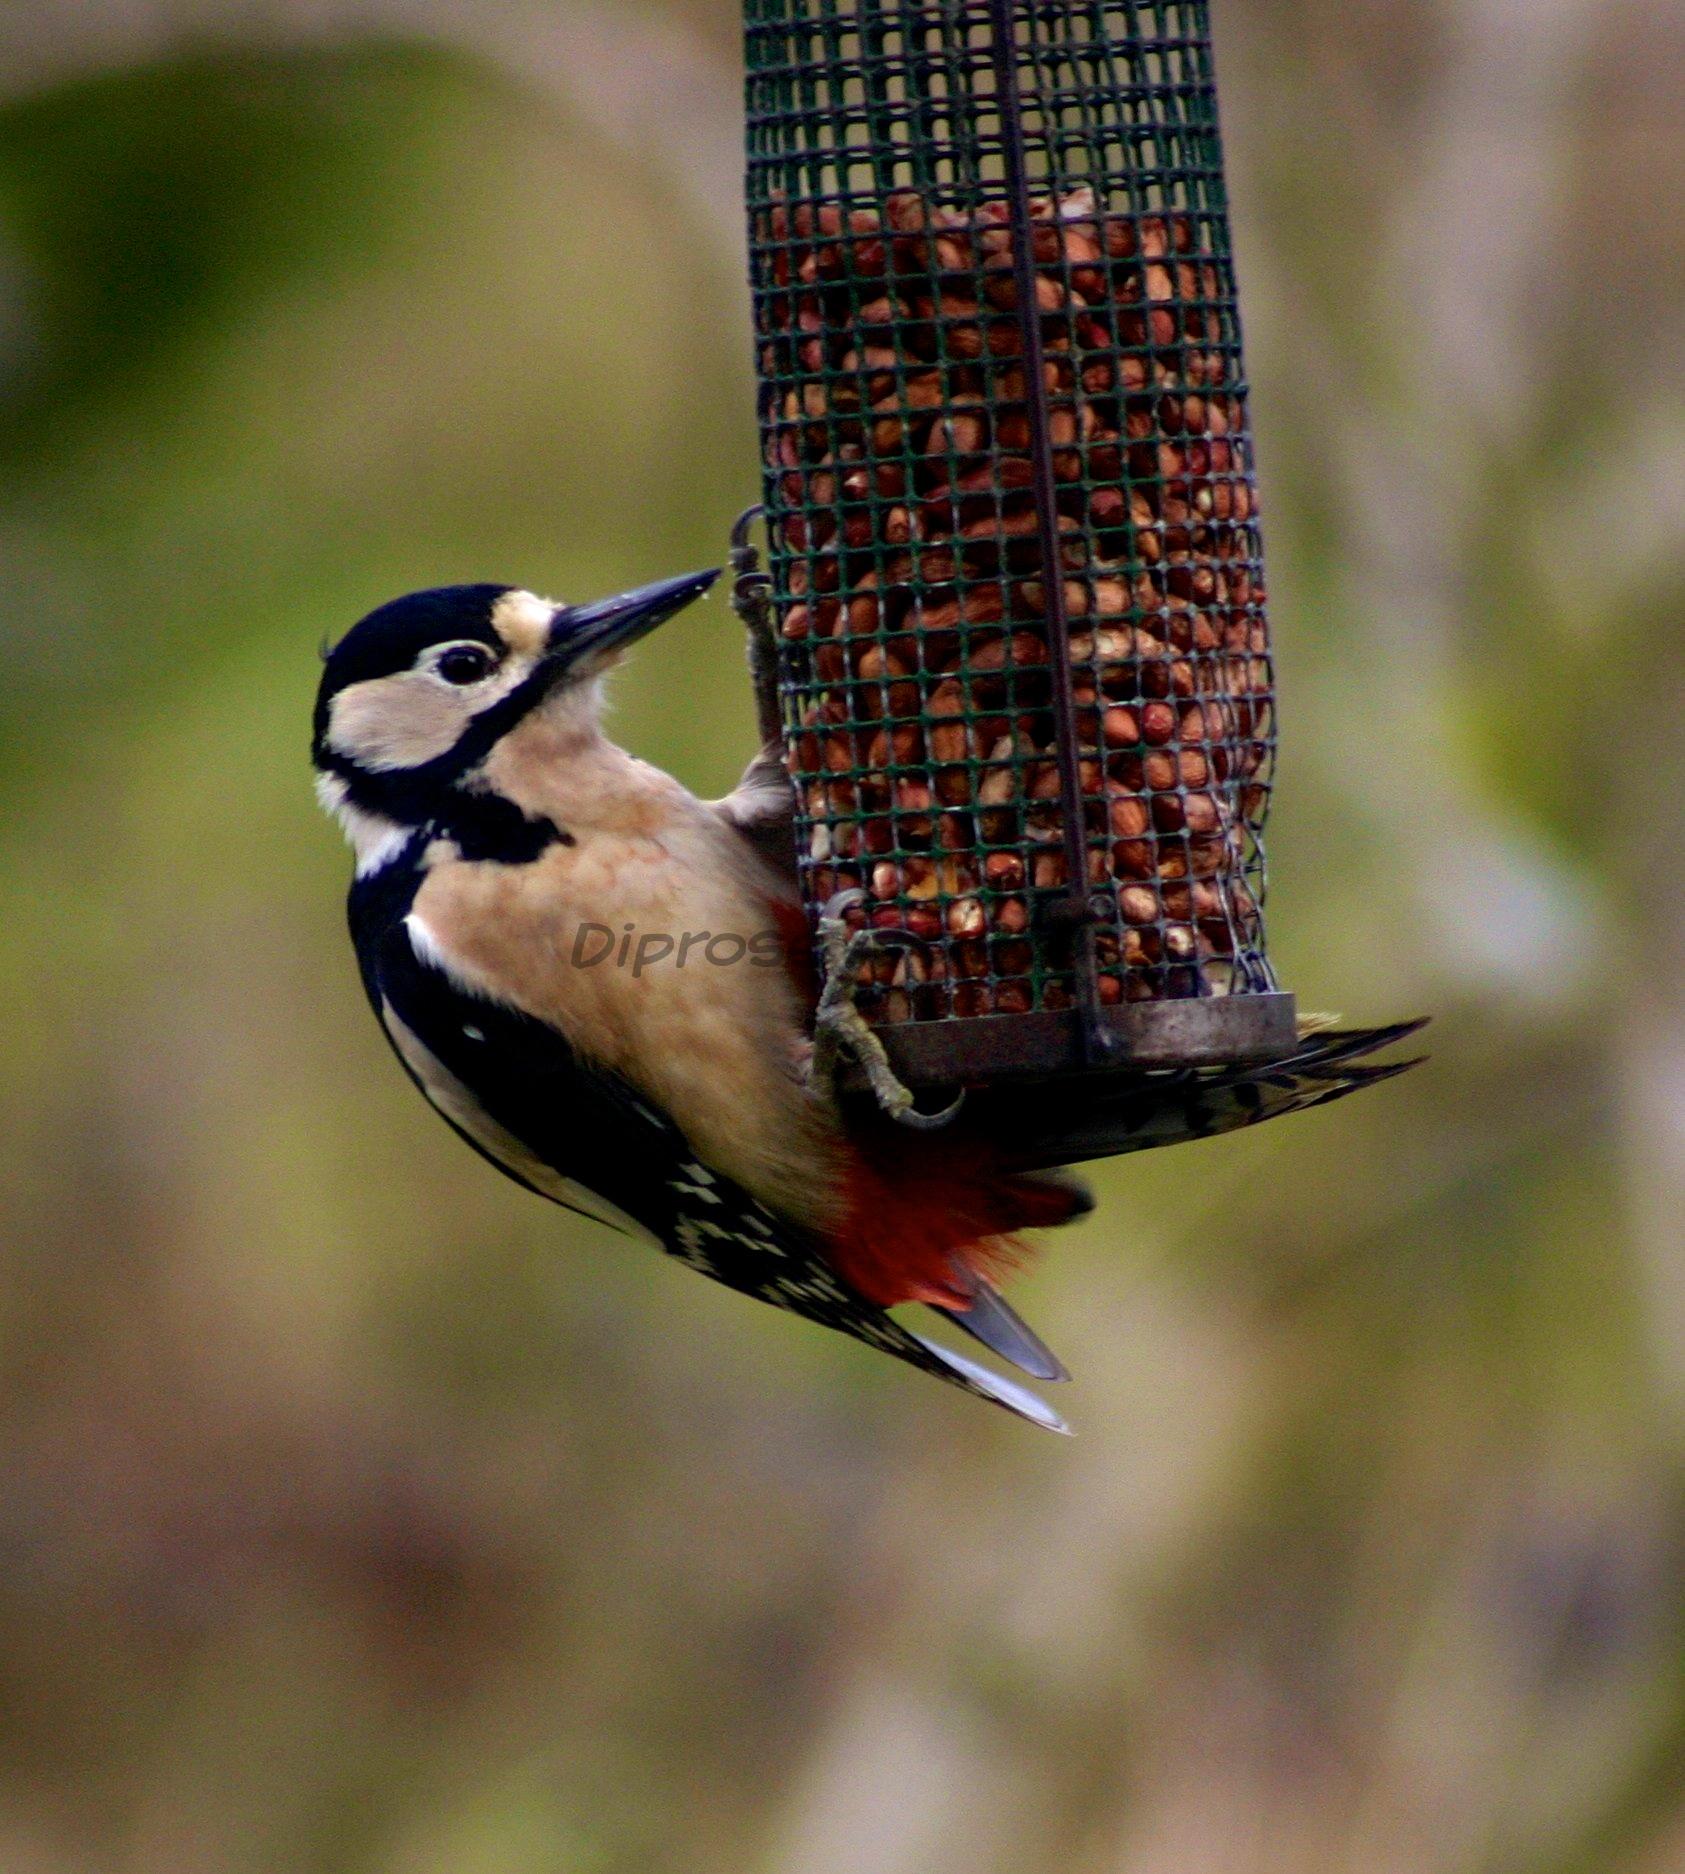 This hooligan somewhat took over my bird table - I forgave him because he was so eye catching however